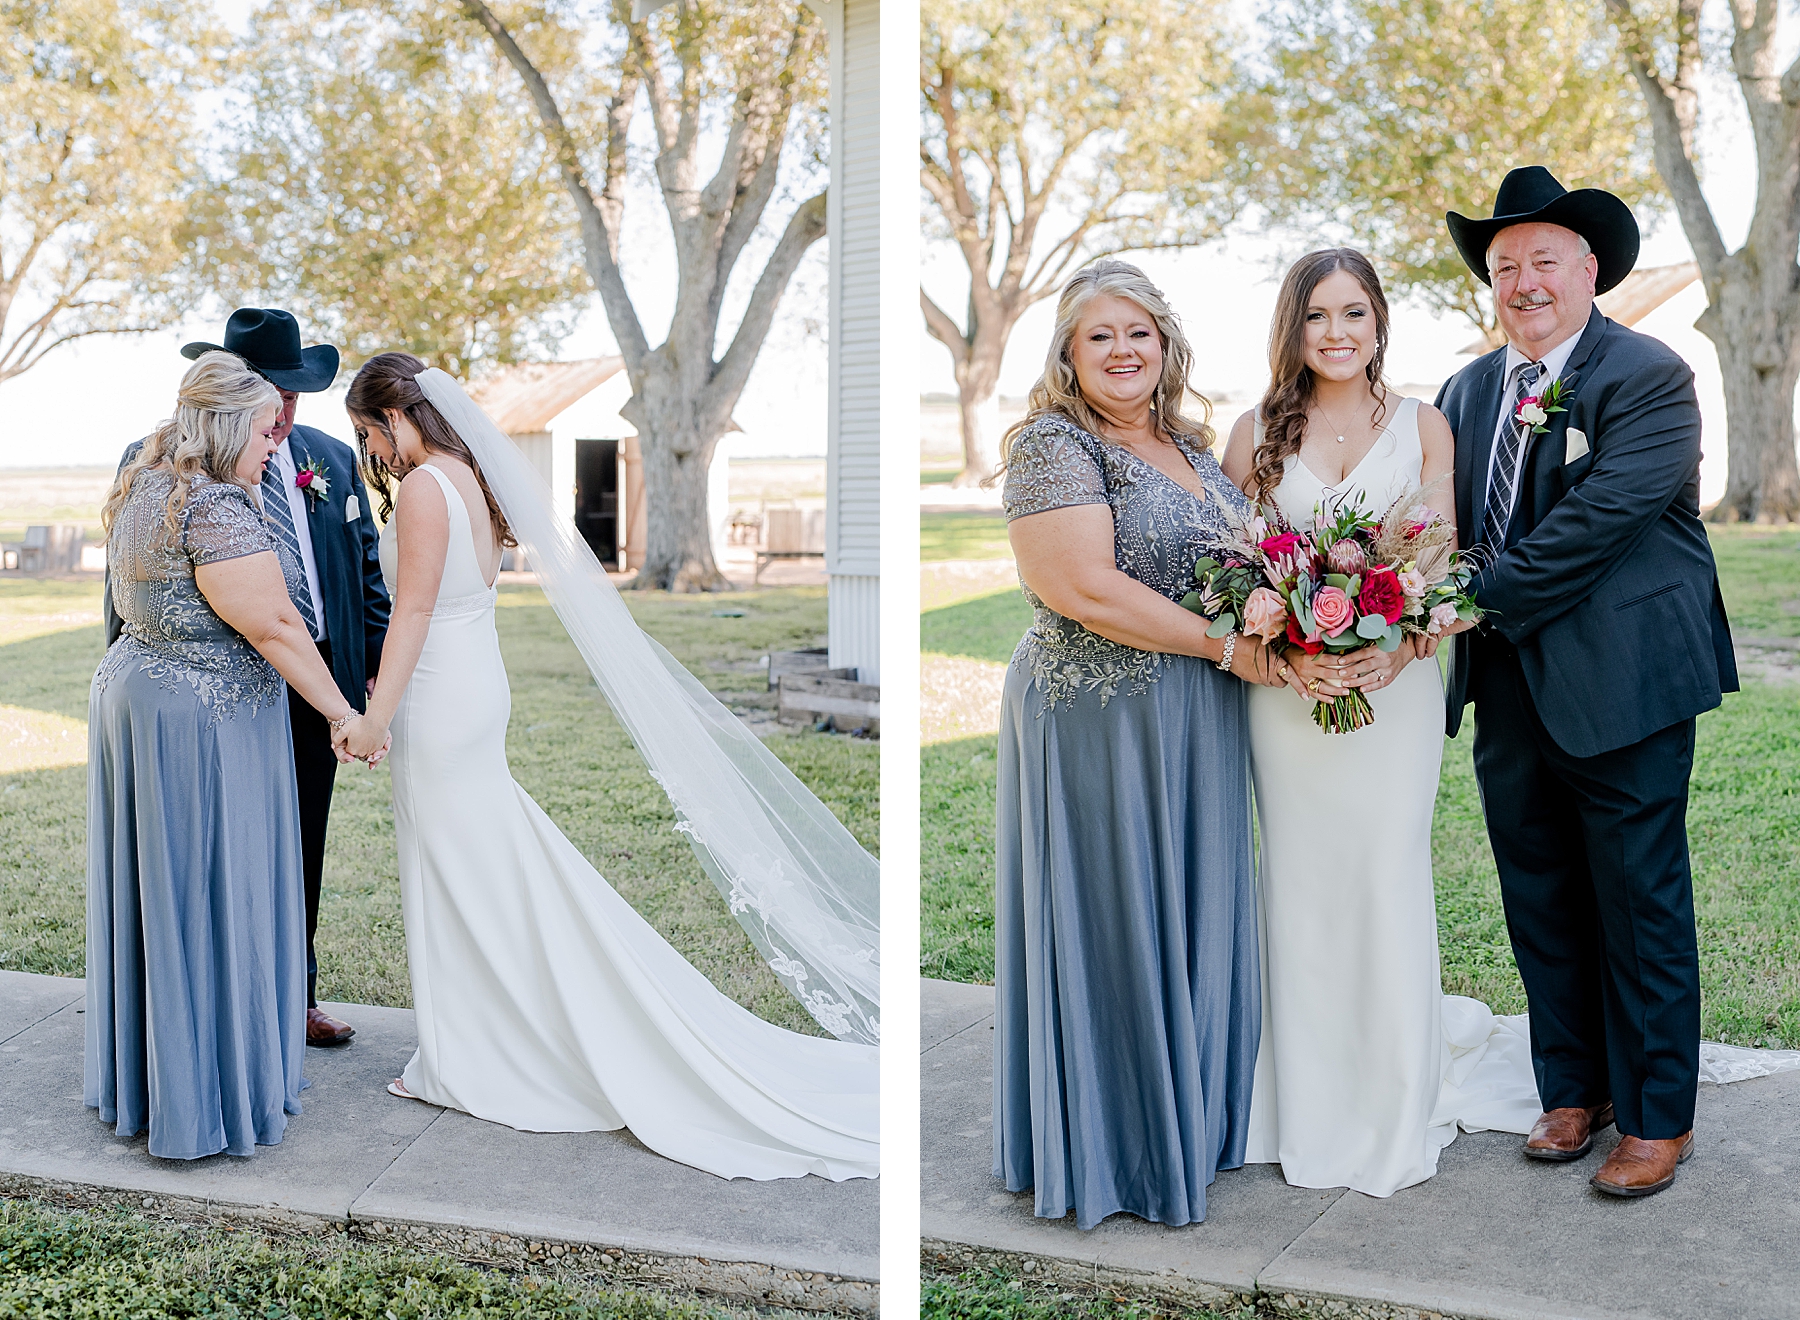 Emerald Green and Jewel-Toned Floral Fall Wedding at The Allen Farmhaus in New Braunfels, Texas | Reiley and Rose | Central Texas Floral Designer | via reileyandrose.com